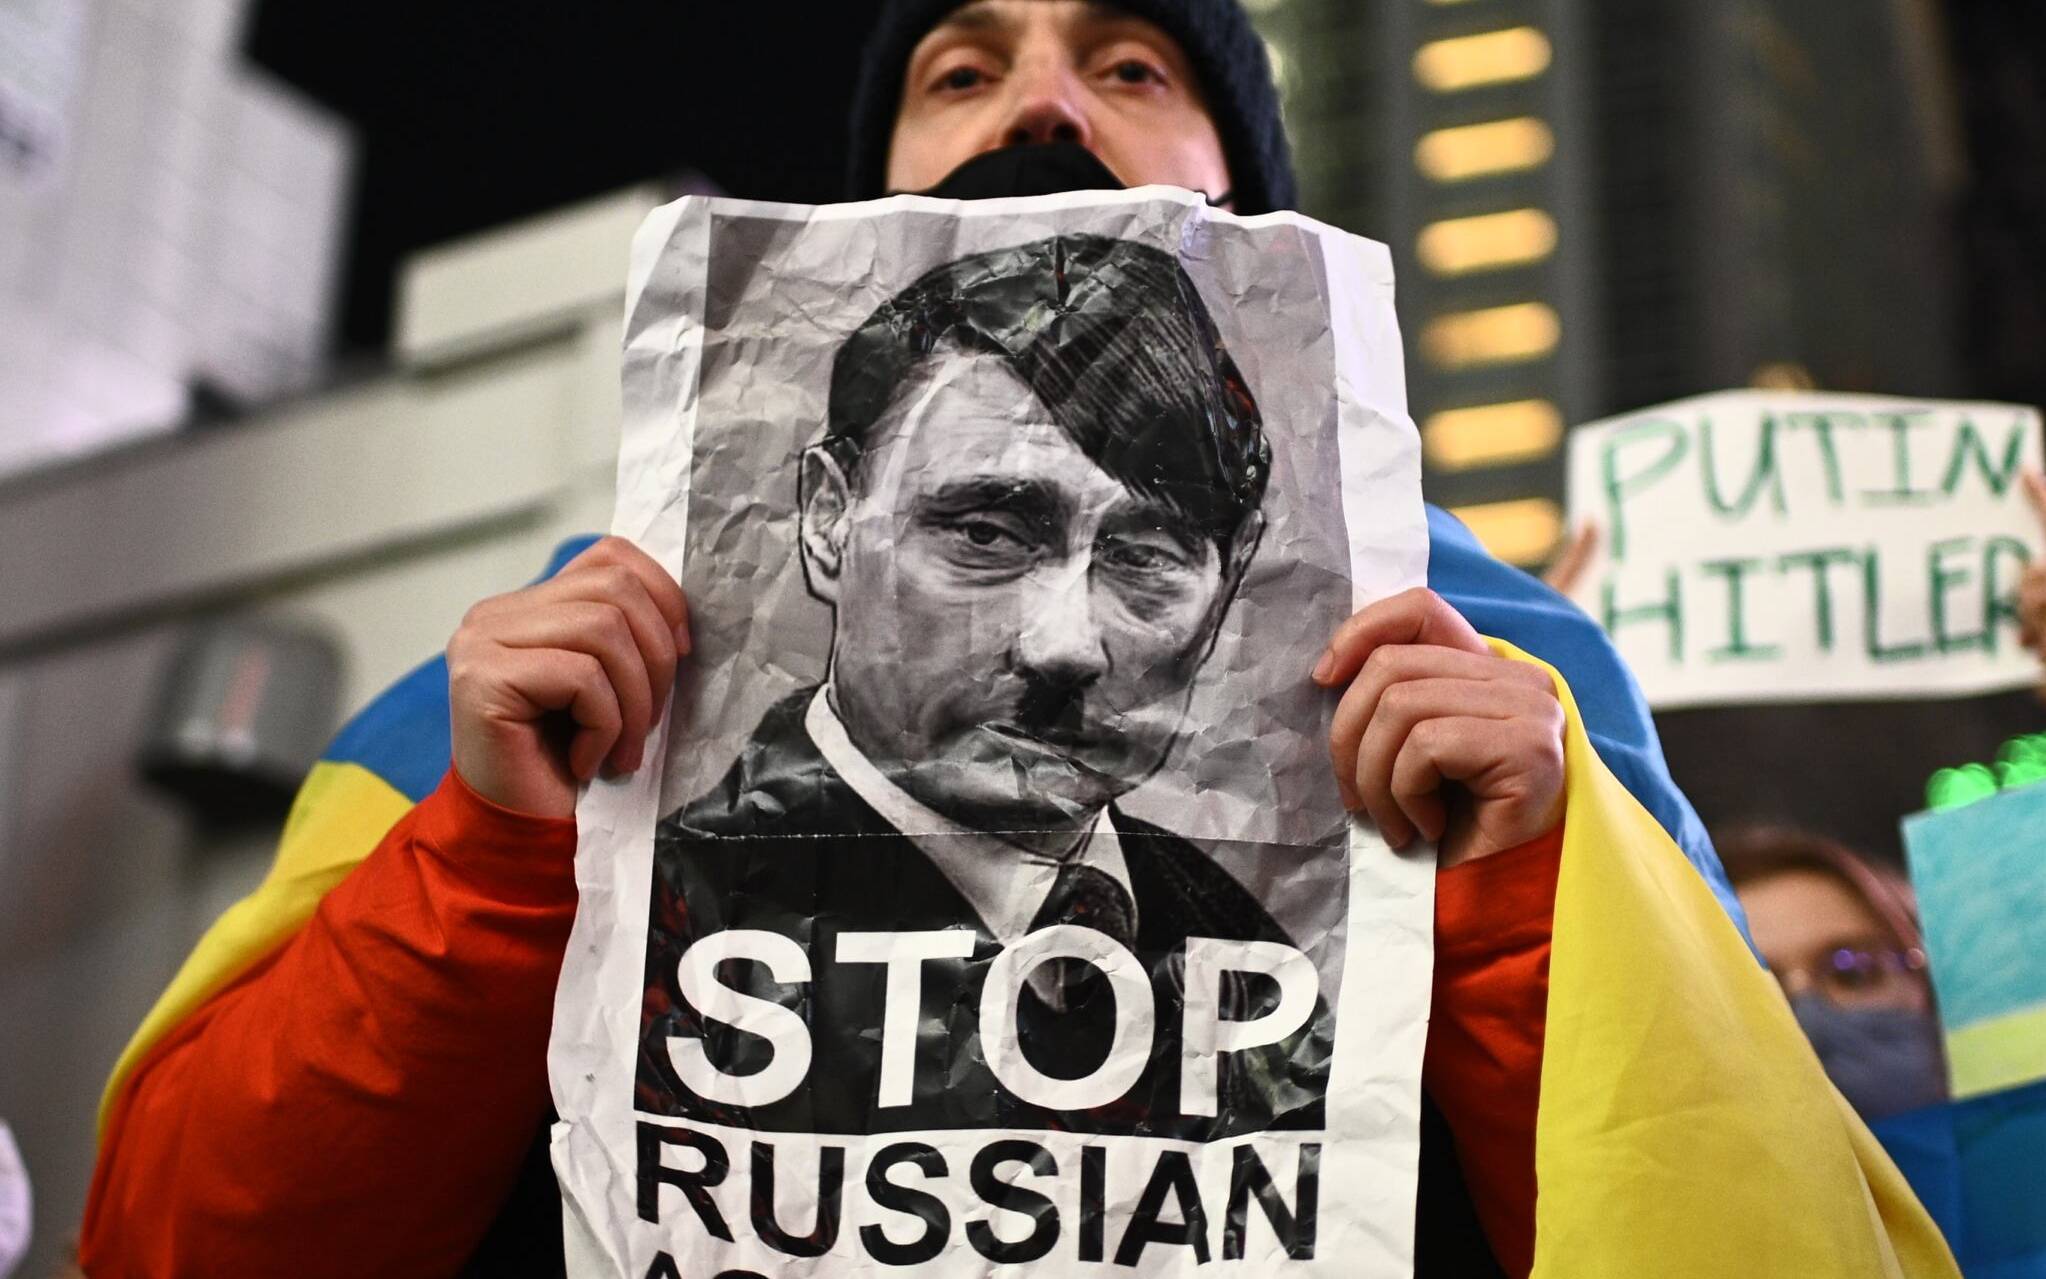 A man takes part in a protest against Russia's actions in Ukraine during a rally at Shibuya district in Tokyo on February 24, 2022. (Photo by Philip FONG / AFP)